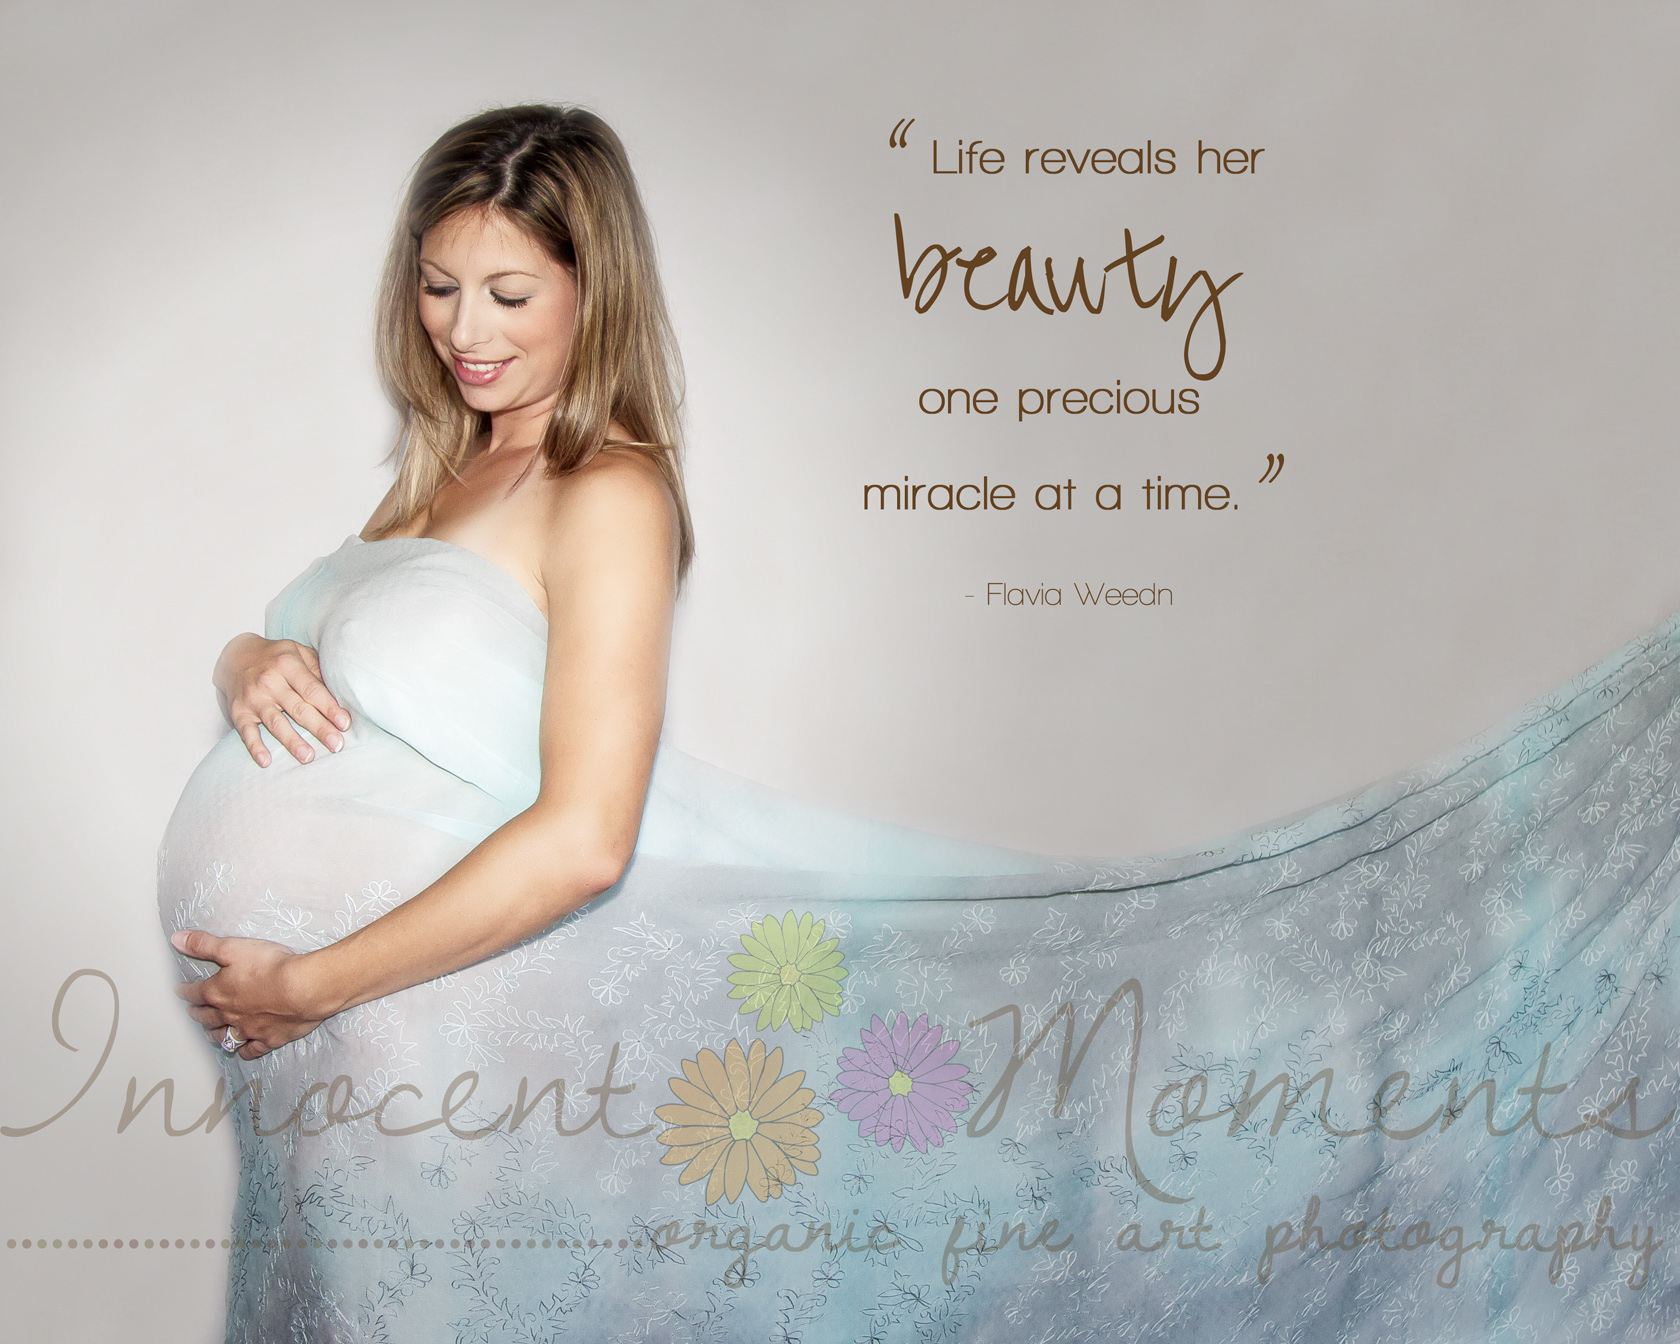 More of quotes gallery for "Maternity" .